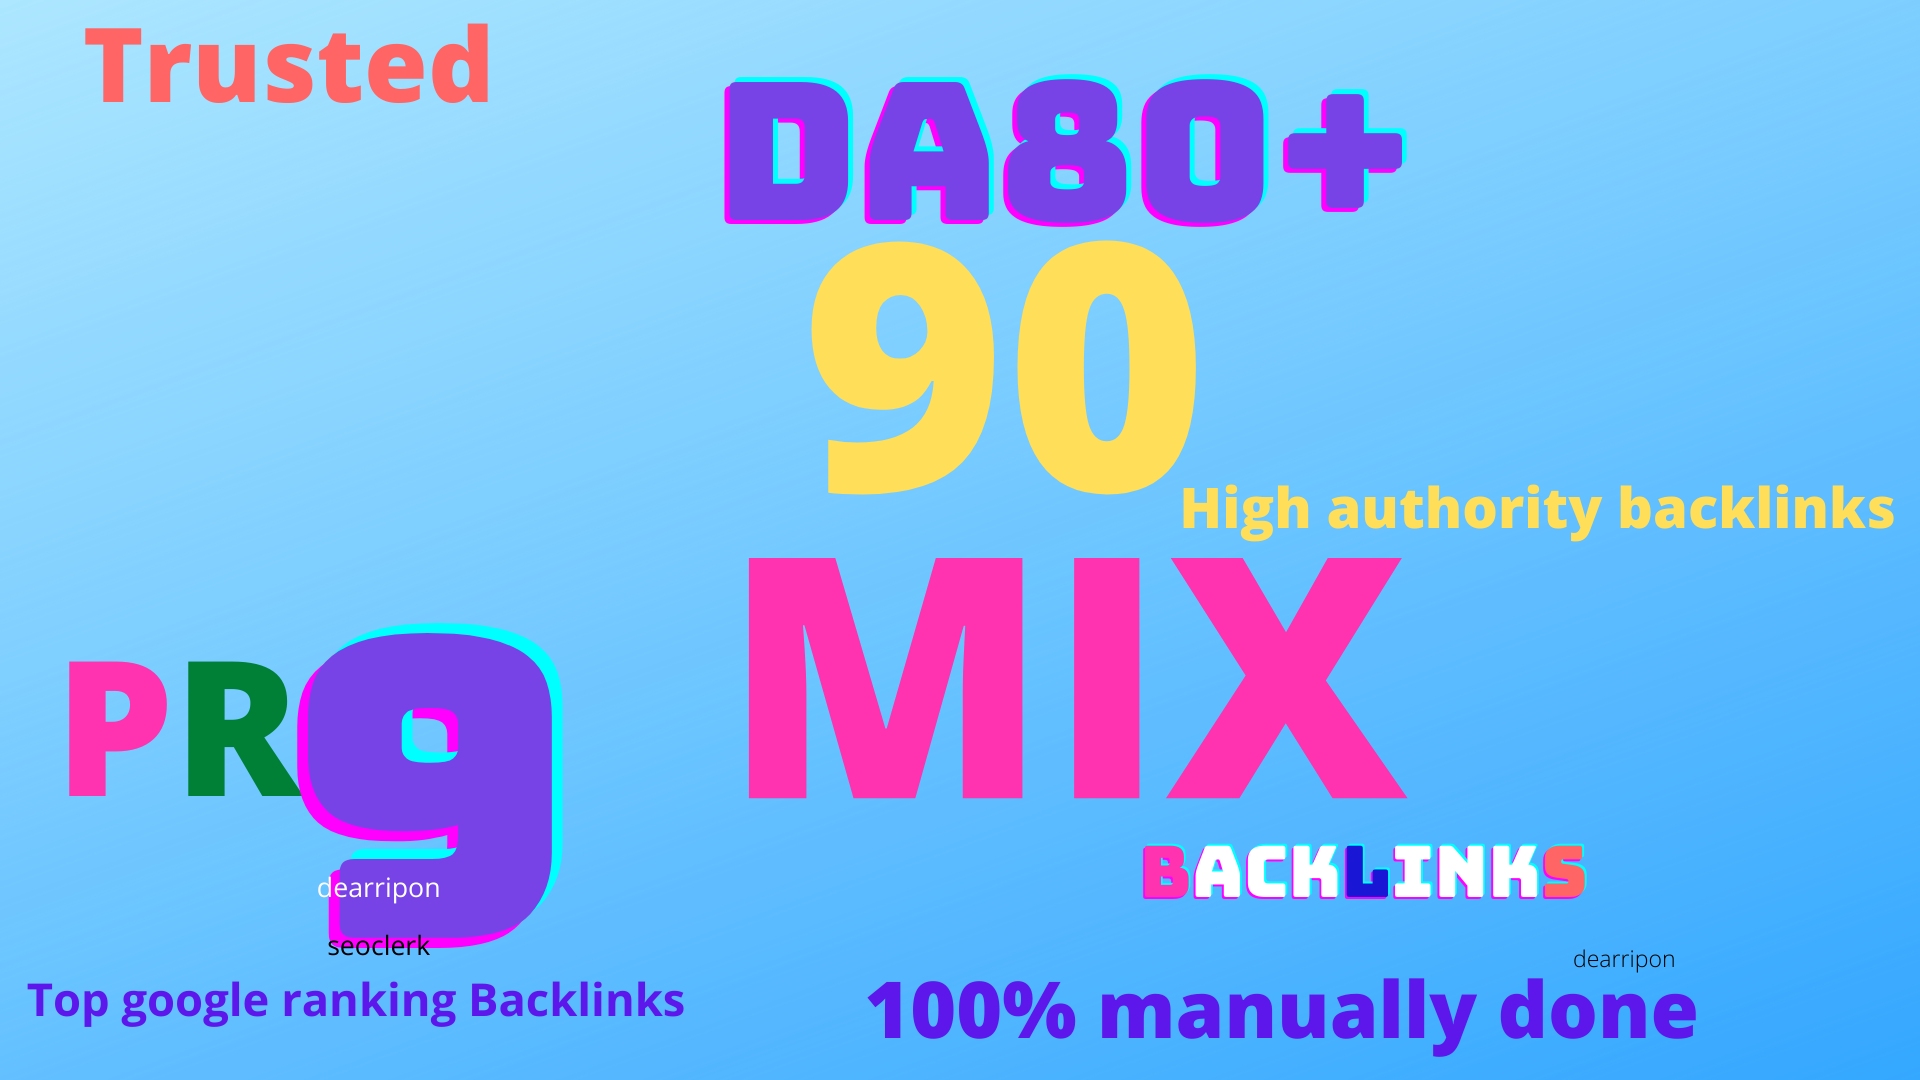 limited time offer-90 Mixed backlinks DA 80+Permanent Natural High quality Do-follow Link building